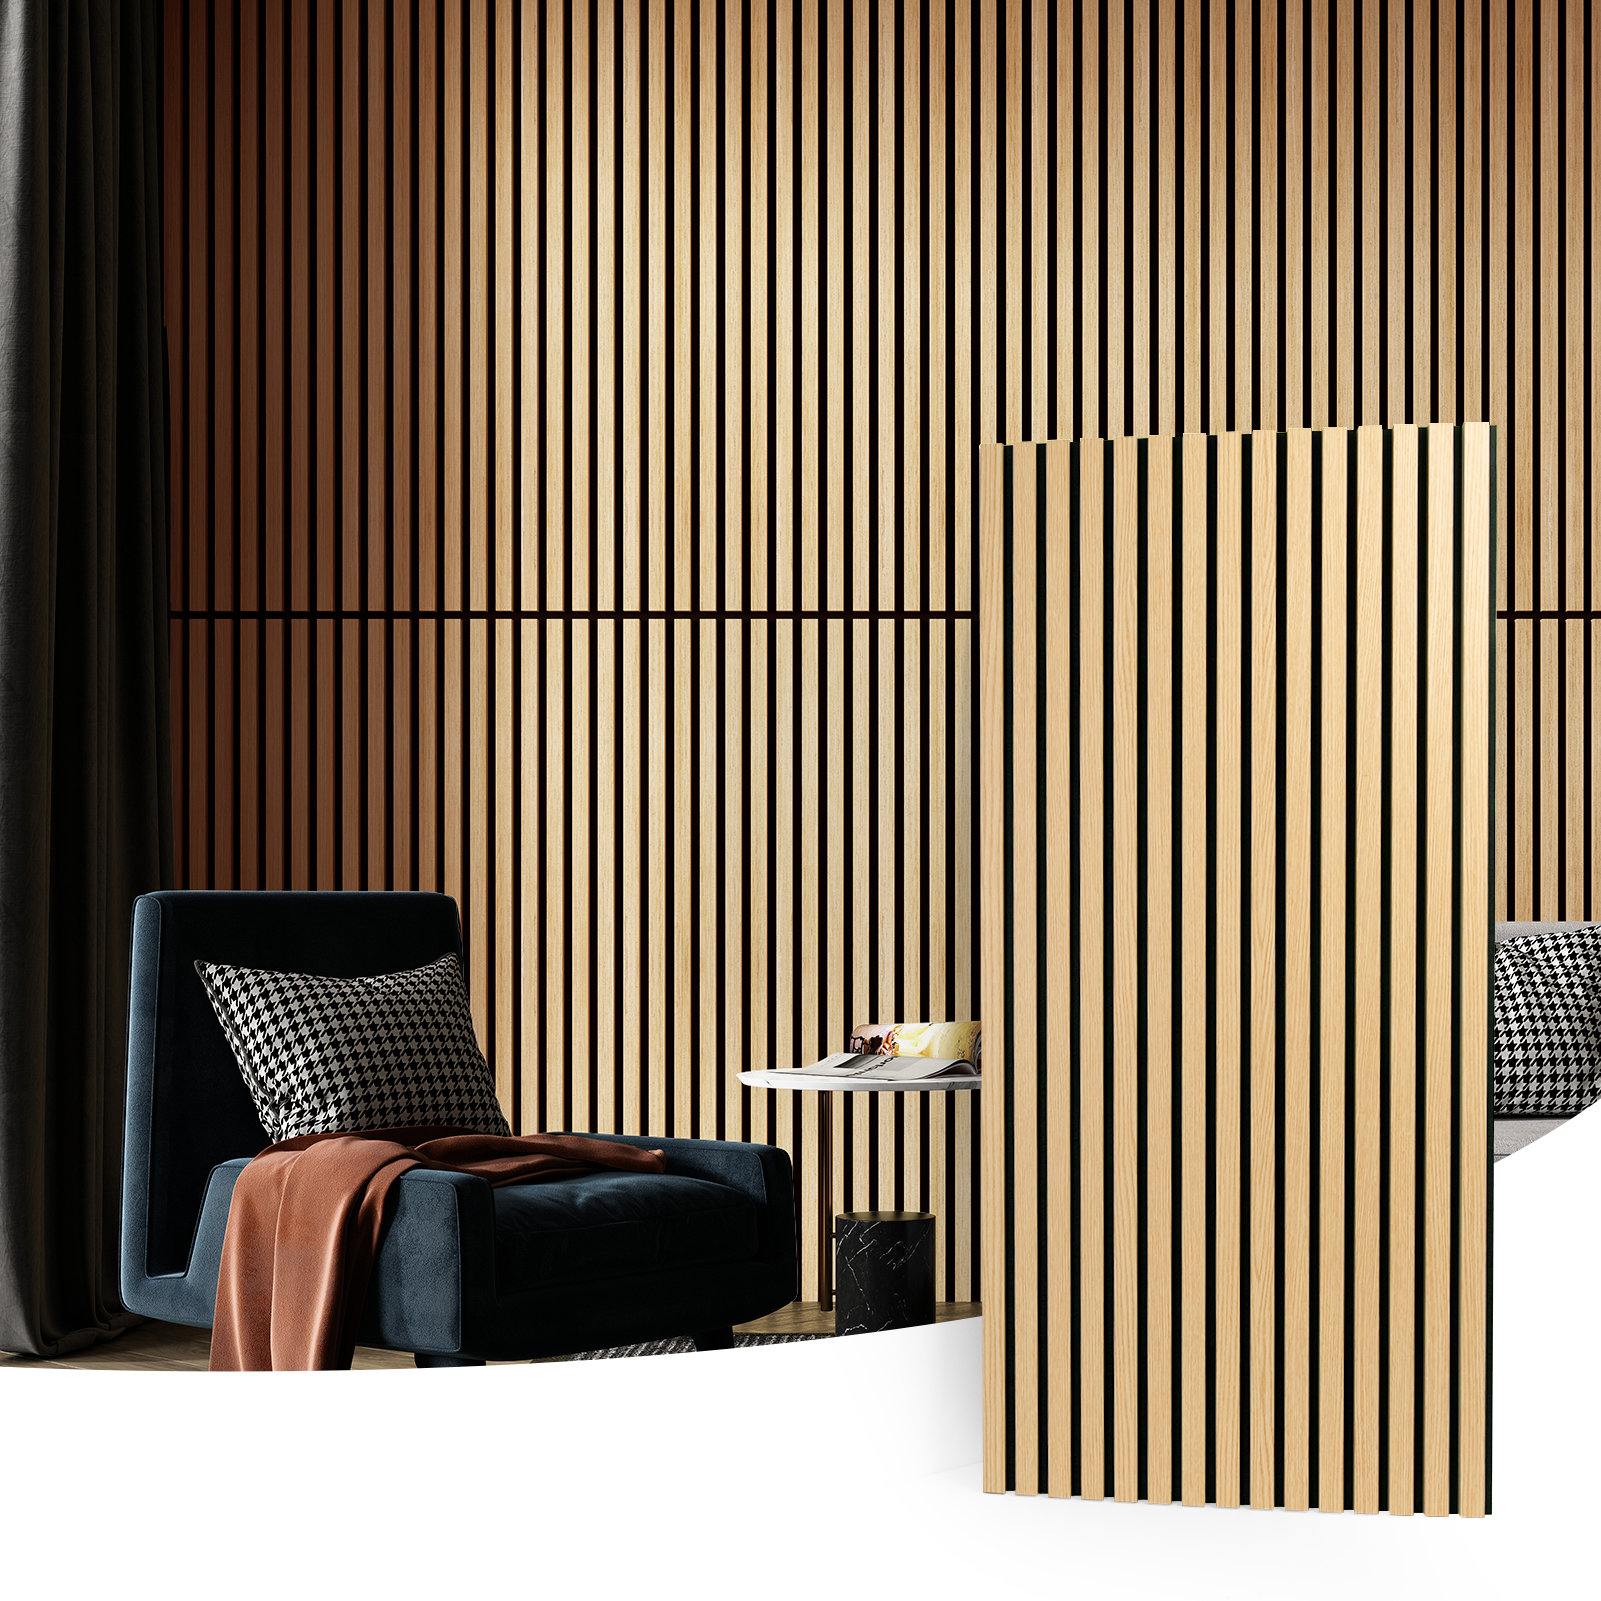 Paintable MDF Slat Wall Panelling- Order Online Today.